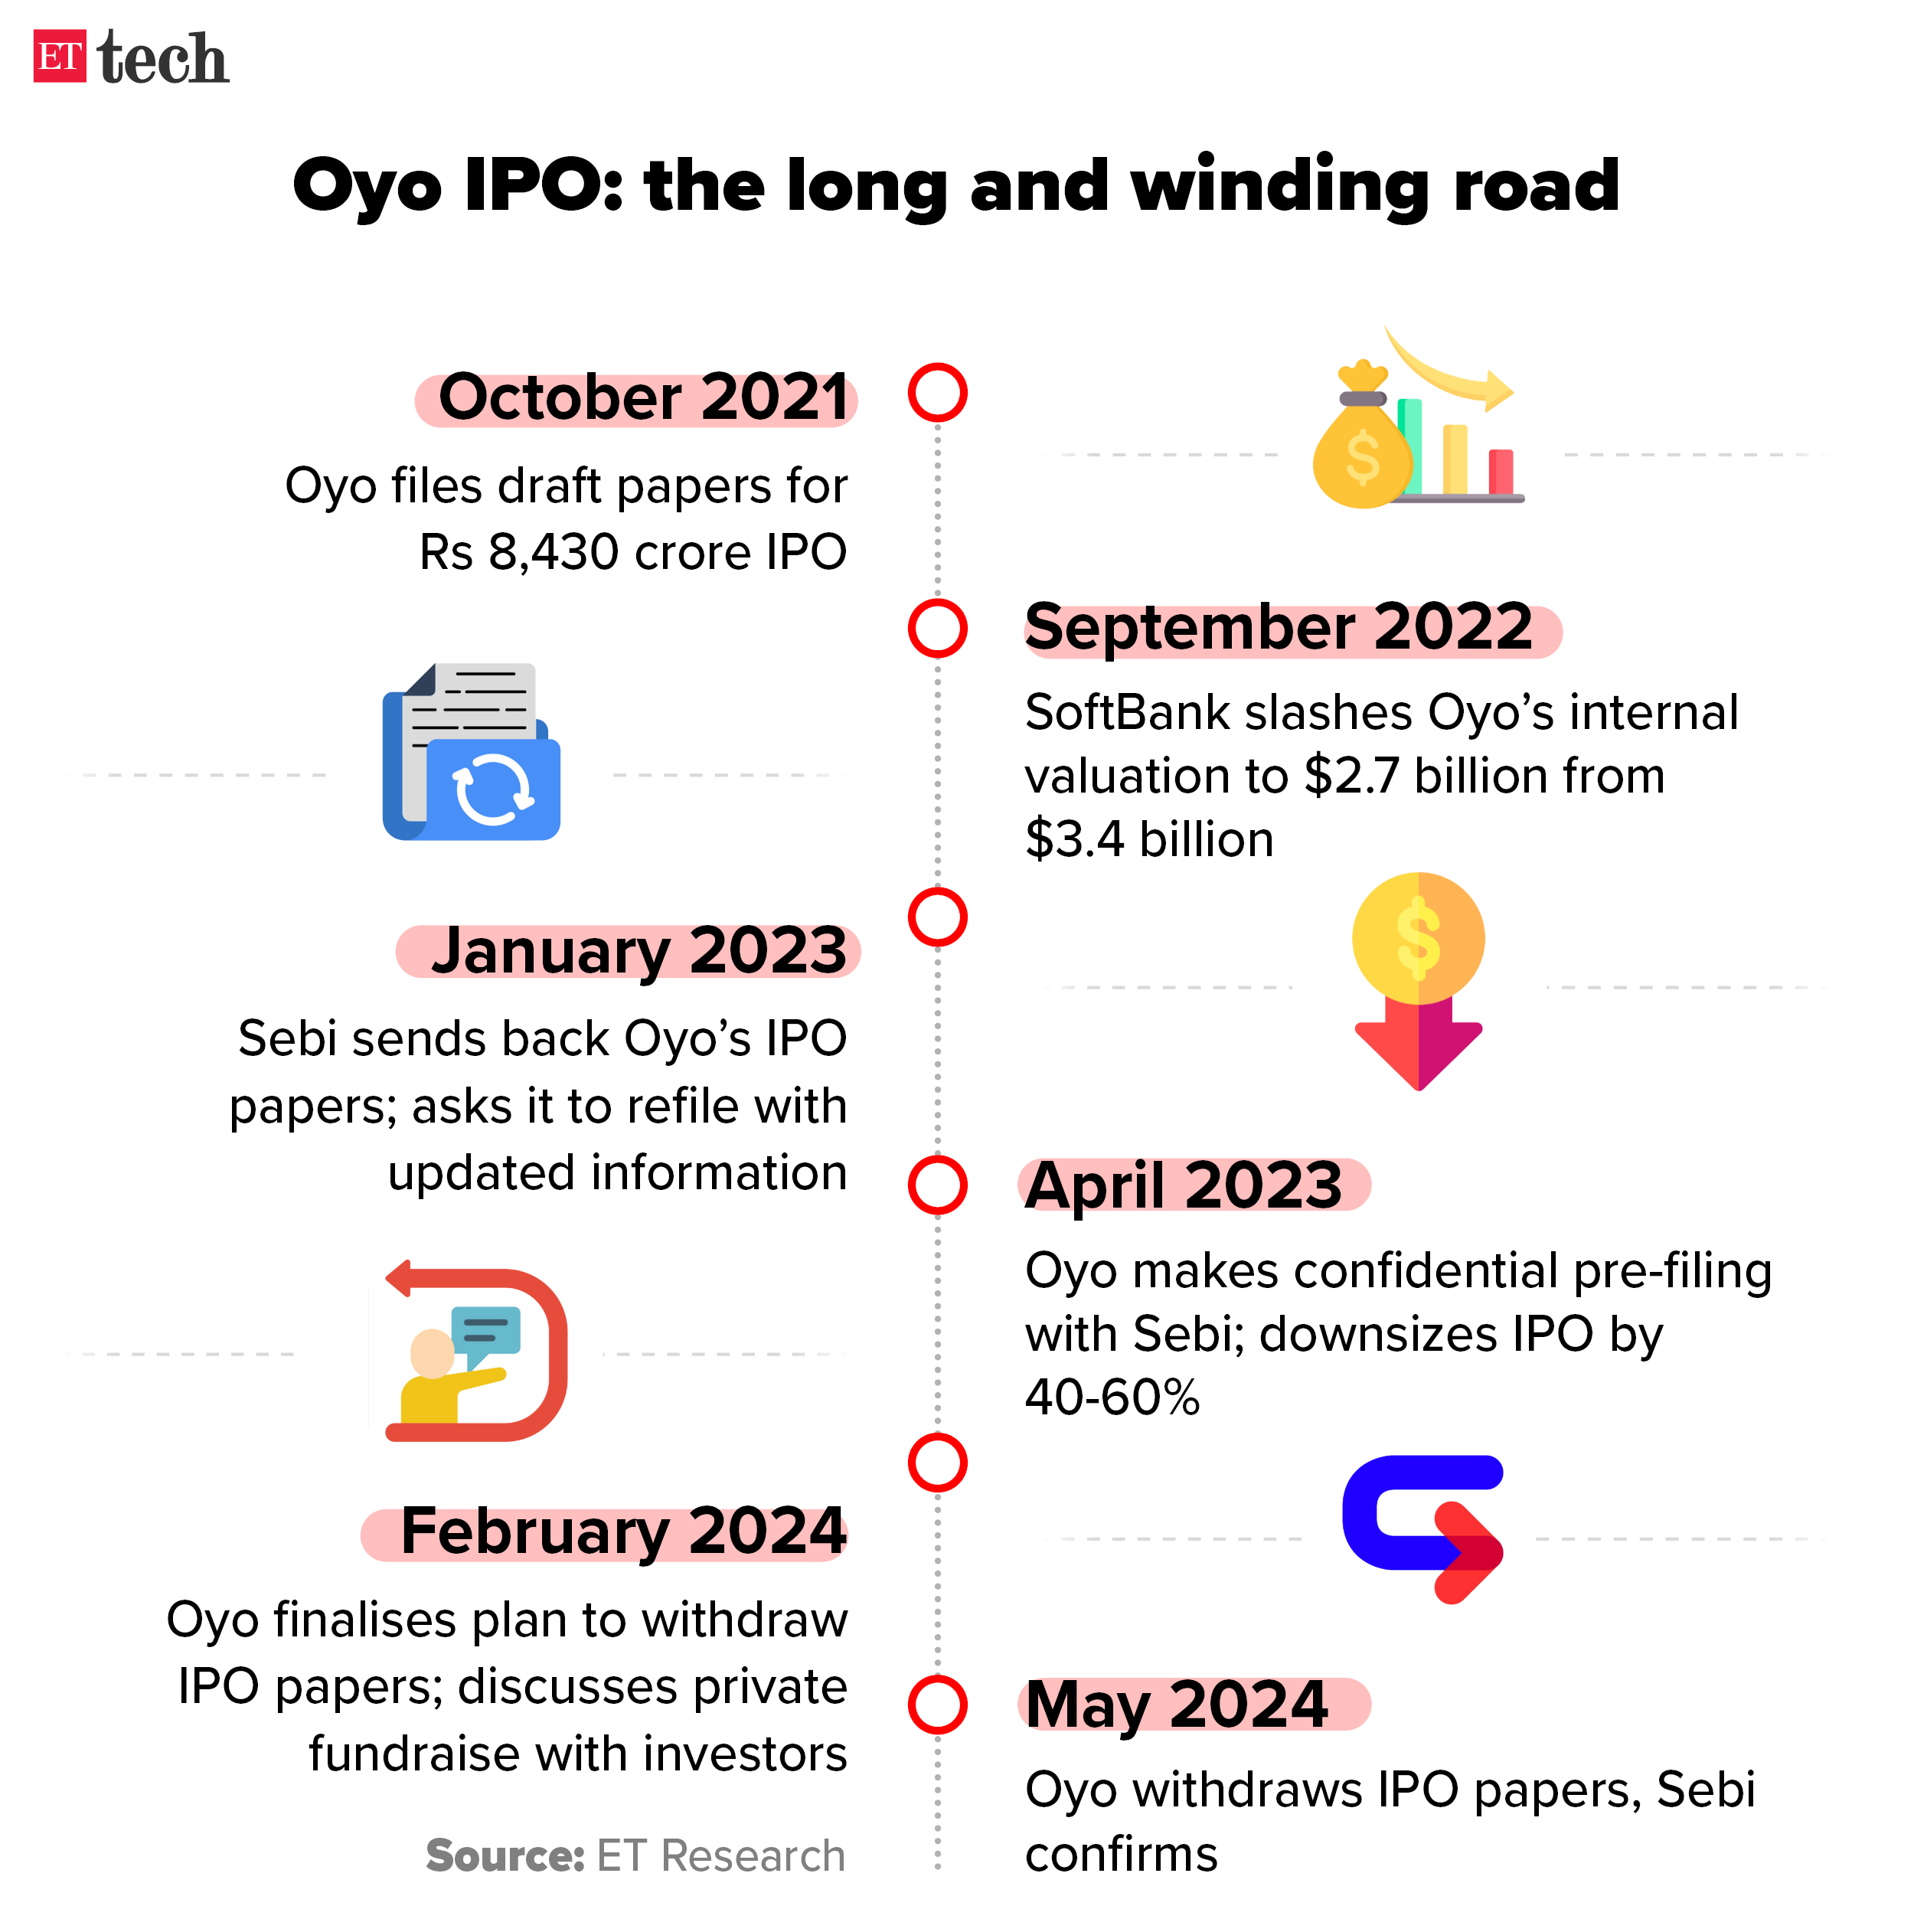 Oyo IPO the long and winding road Timeline May 2024 Graphic ETTECH